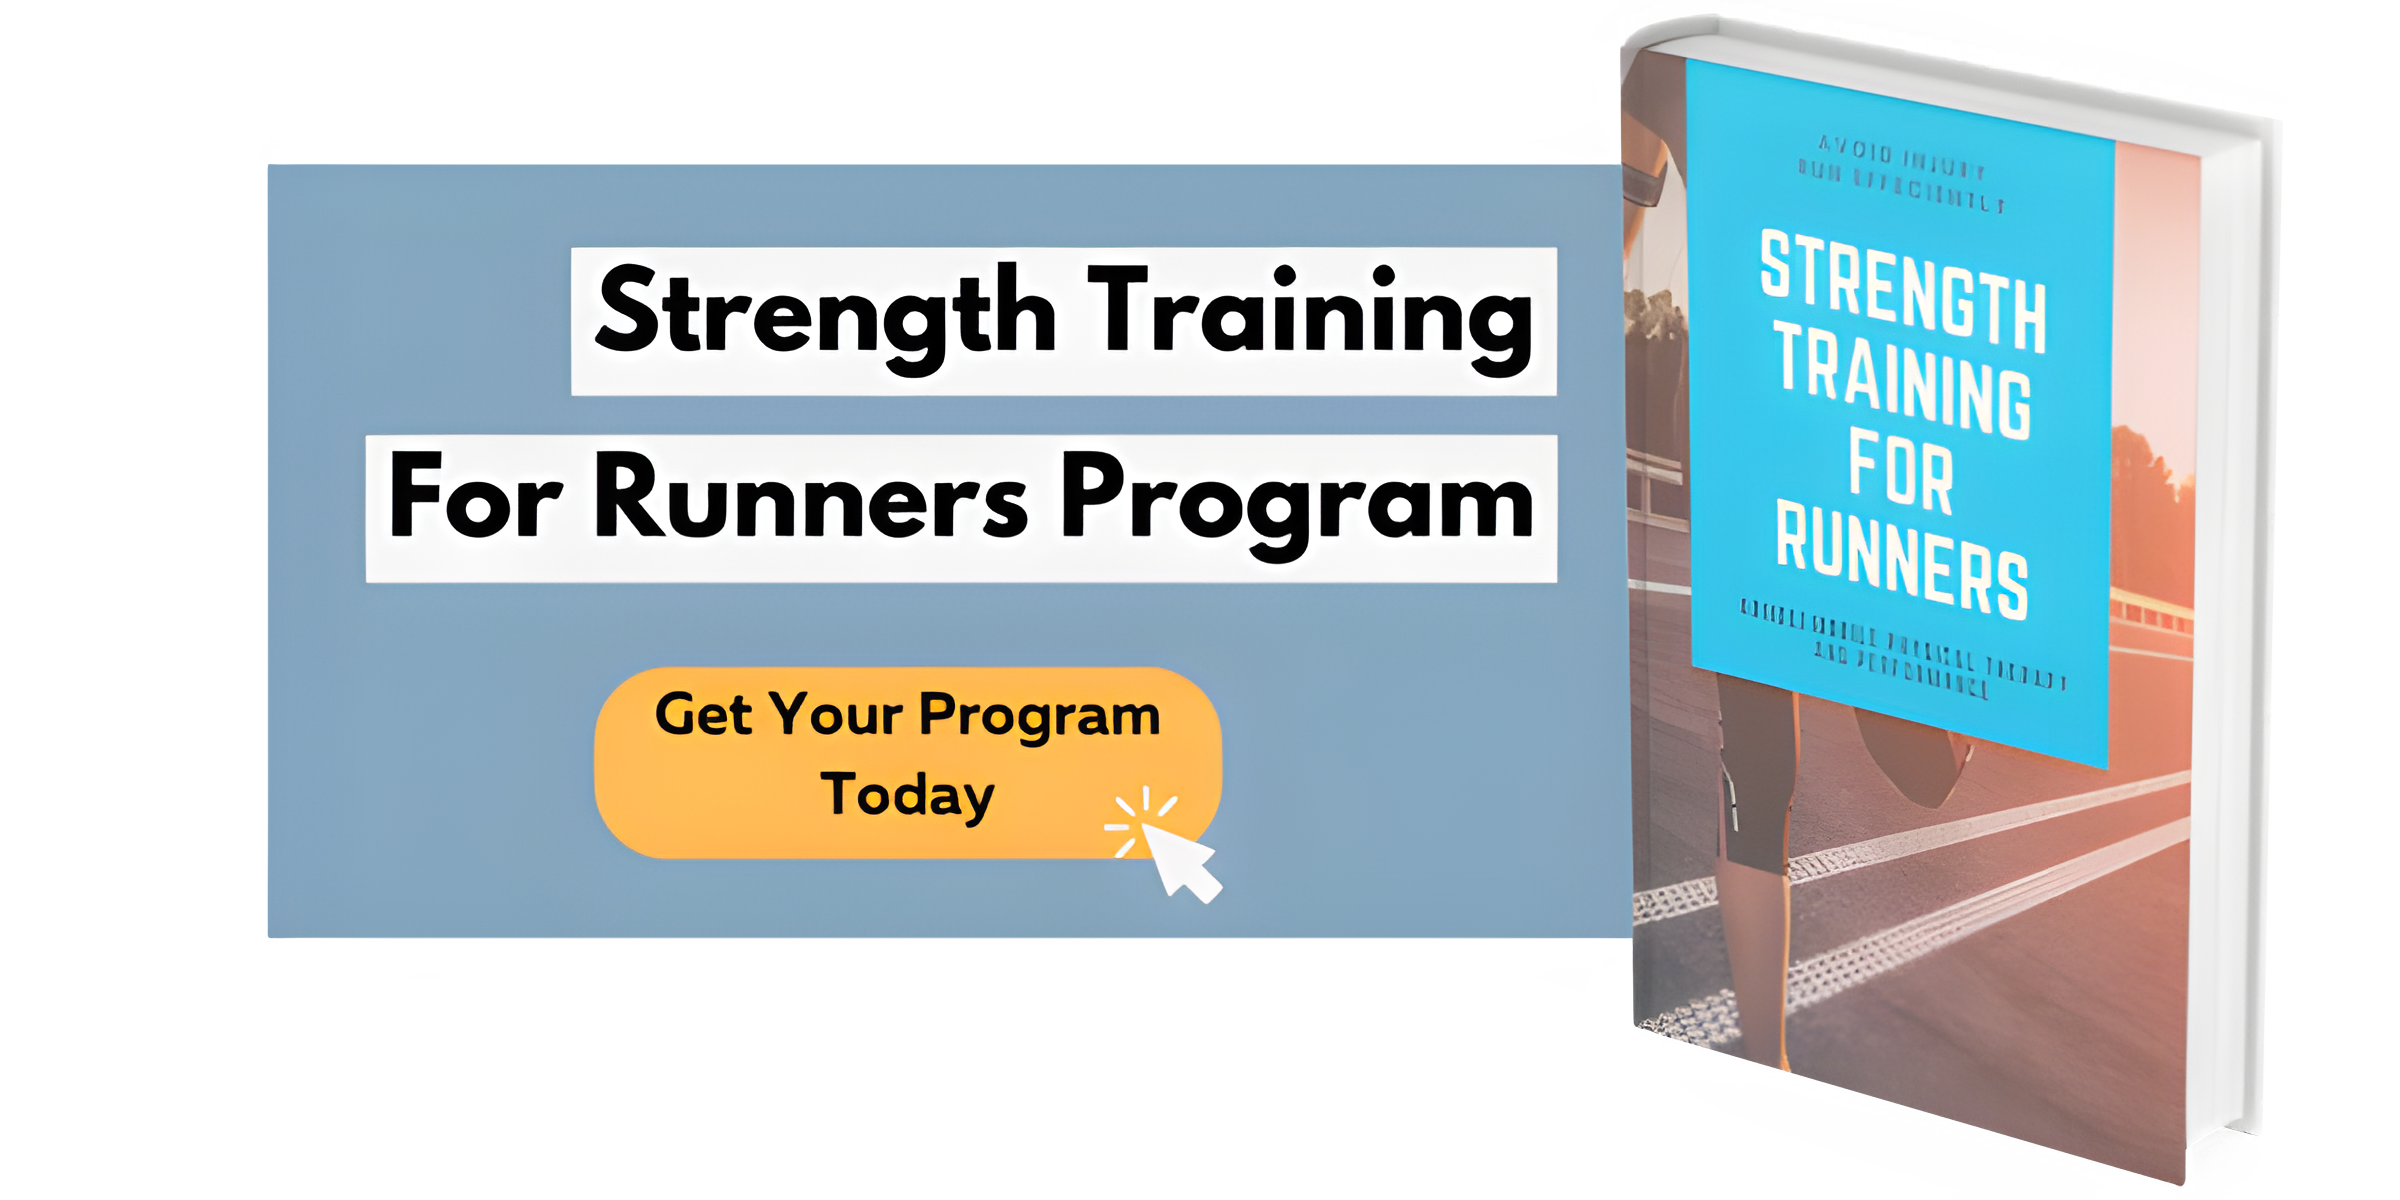 Image of strength training program with text overlay strength training for runners